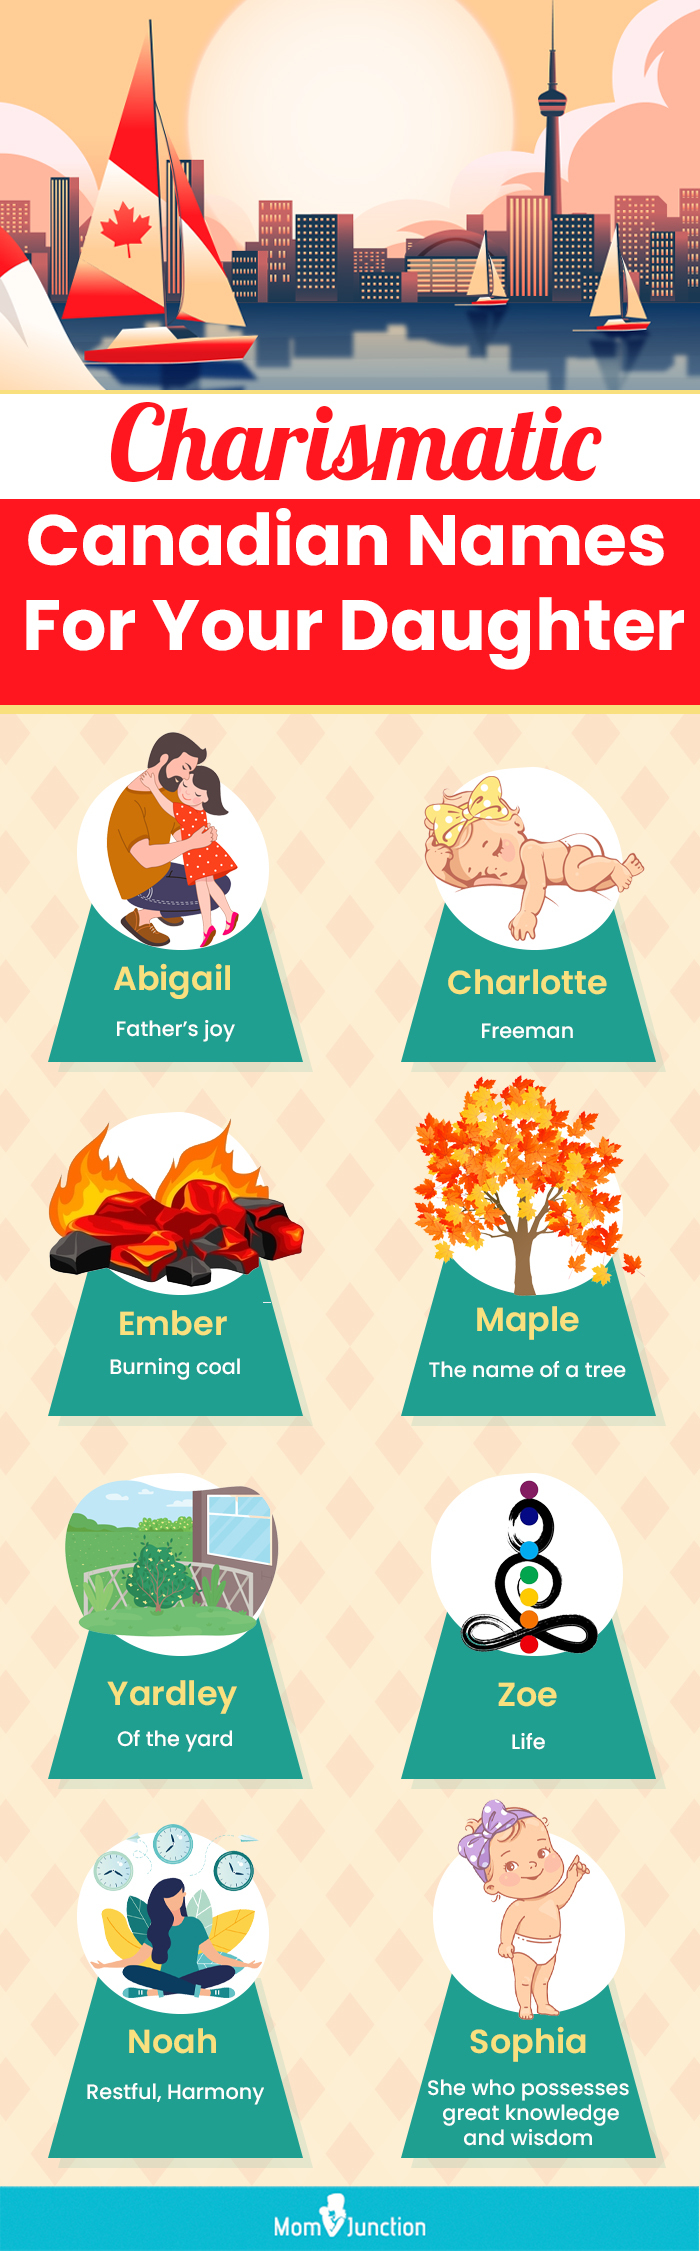 charismatic canadian names for your daughter (infographic)